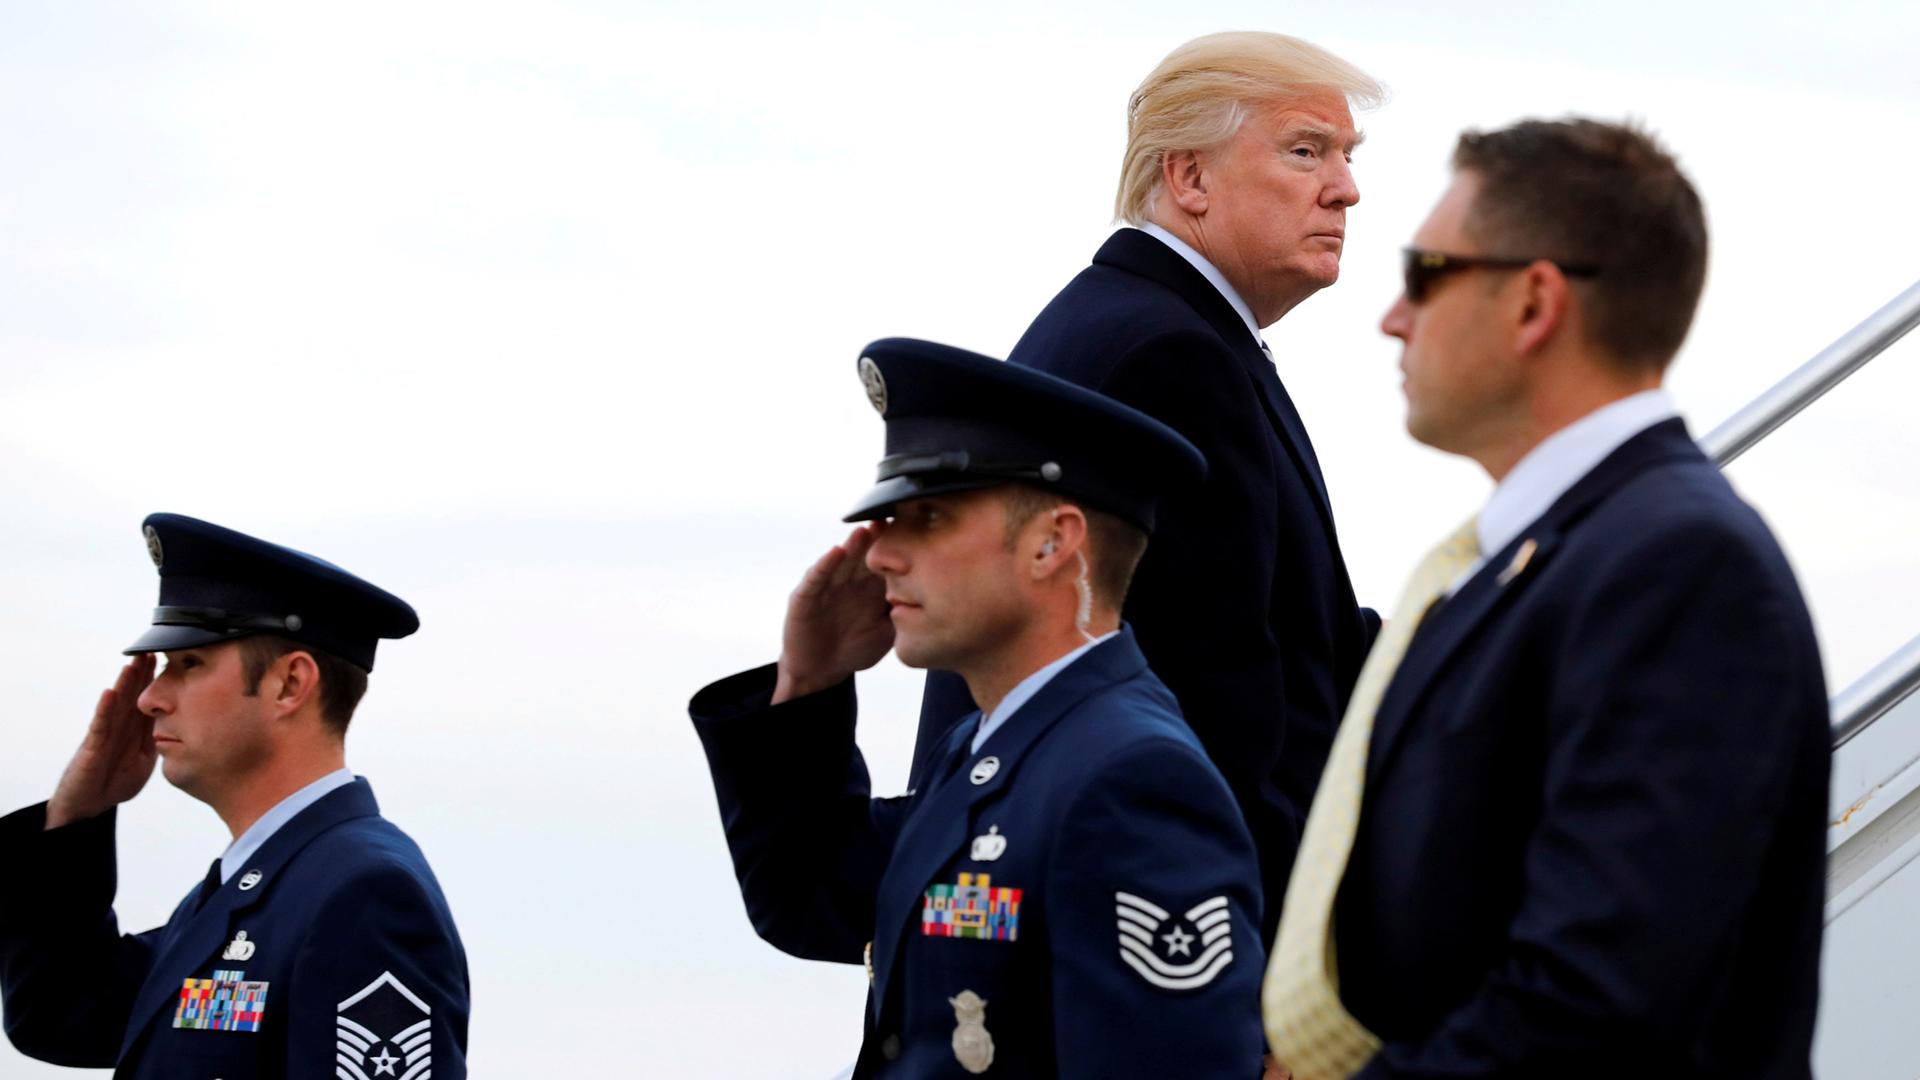 President Donald Trump looks to his right while walking up the stairs to Air Force One with two Air Force officials soluting in the foreground.